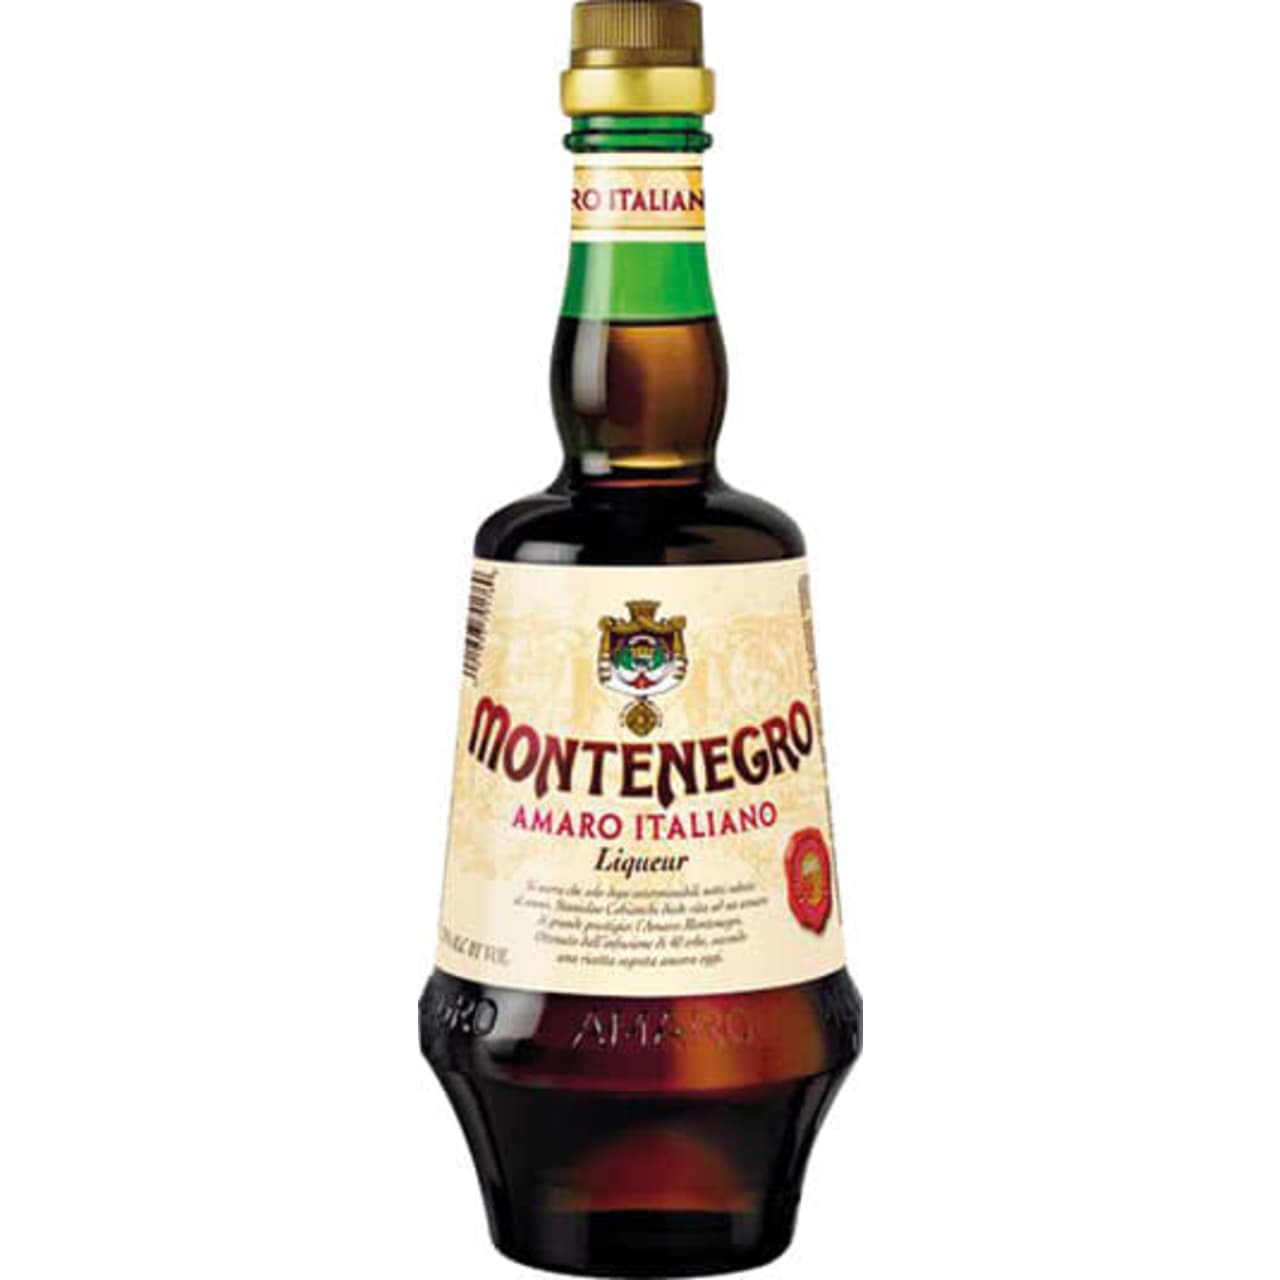 Amaro Montenegro displays a rich and pleasantly balanced taste, thanks to its low ABV and bitter-sweet flavour profile.